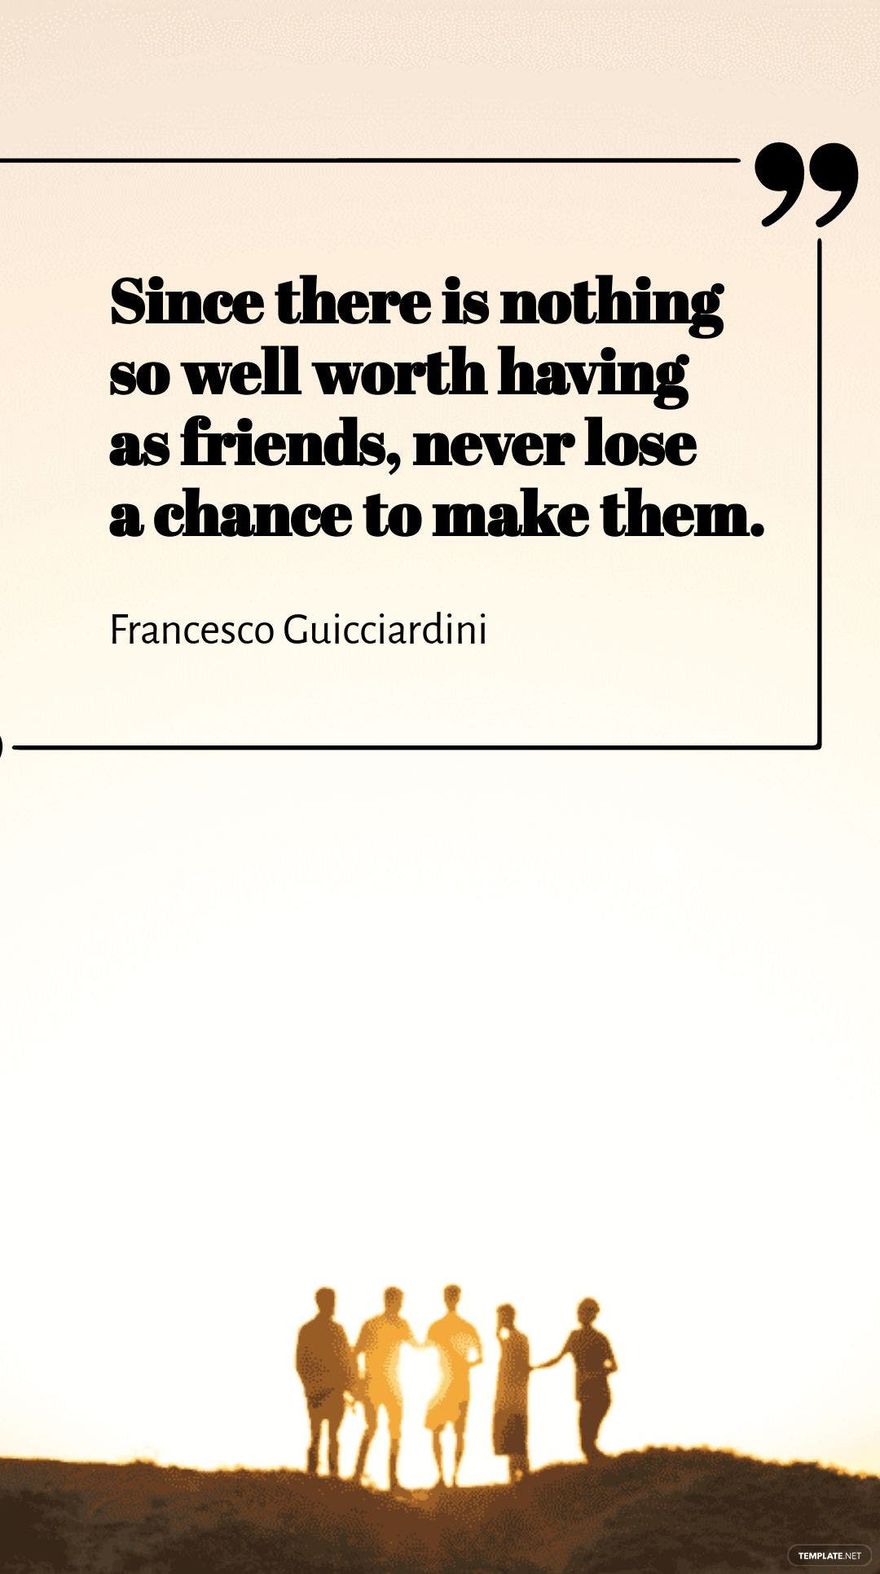 Francesco Guicciardini - Since there is nothing so well worth having as friends, never lose a chance to make them.